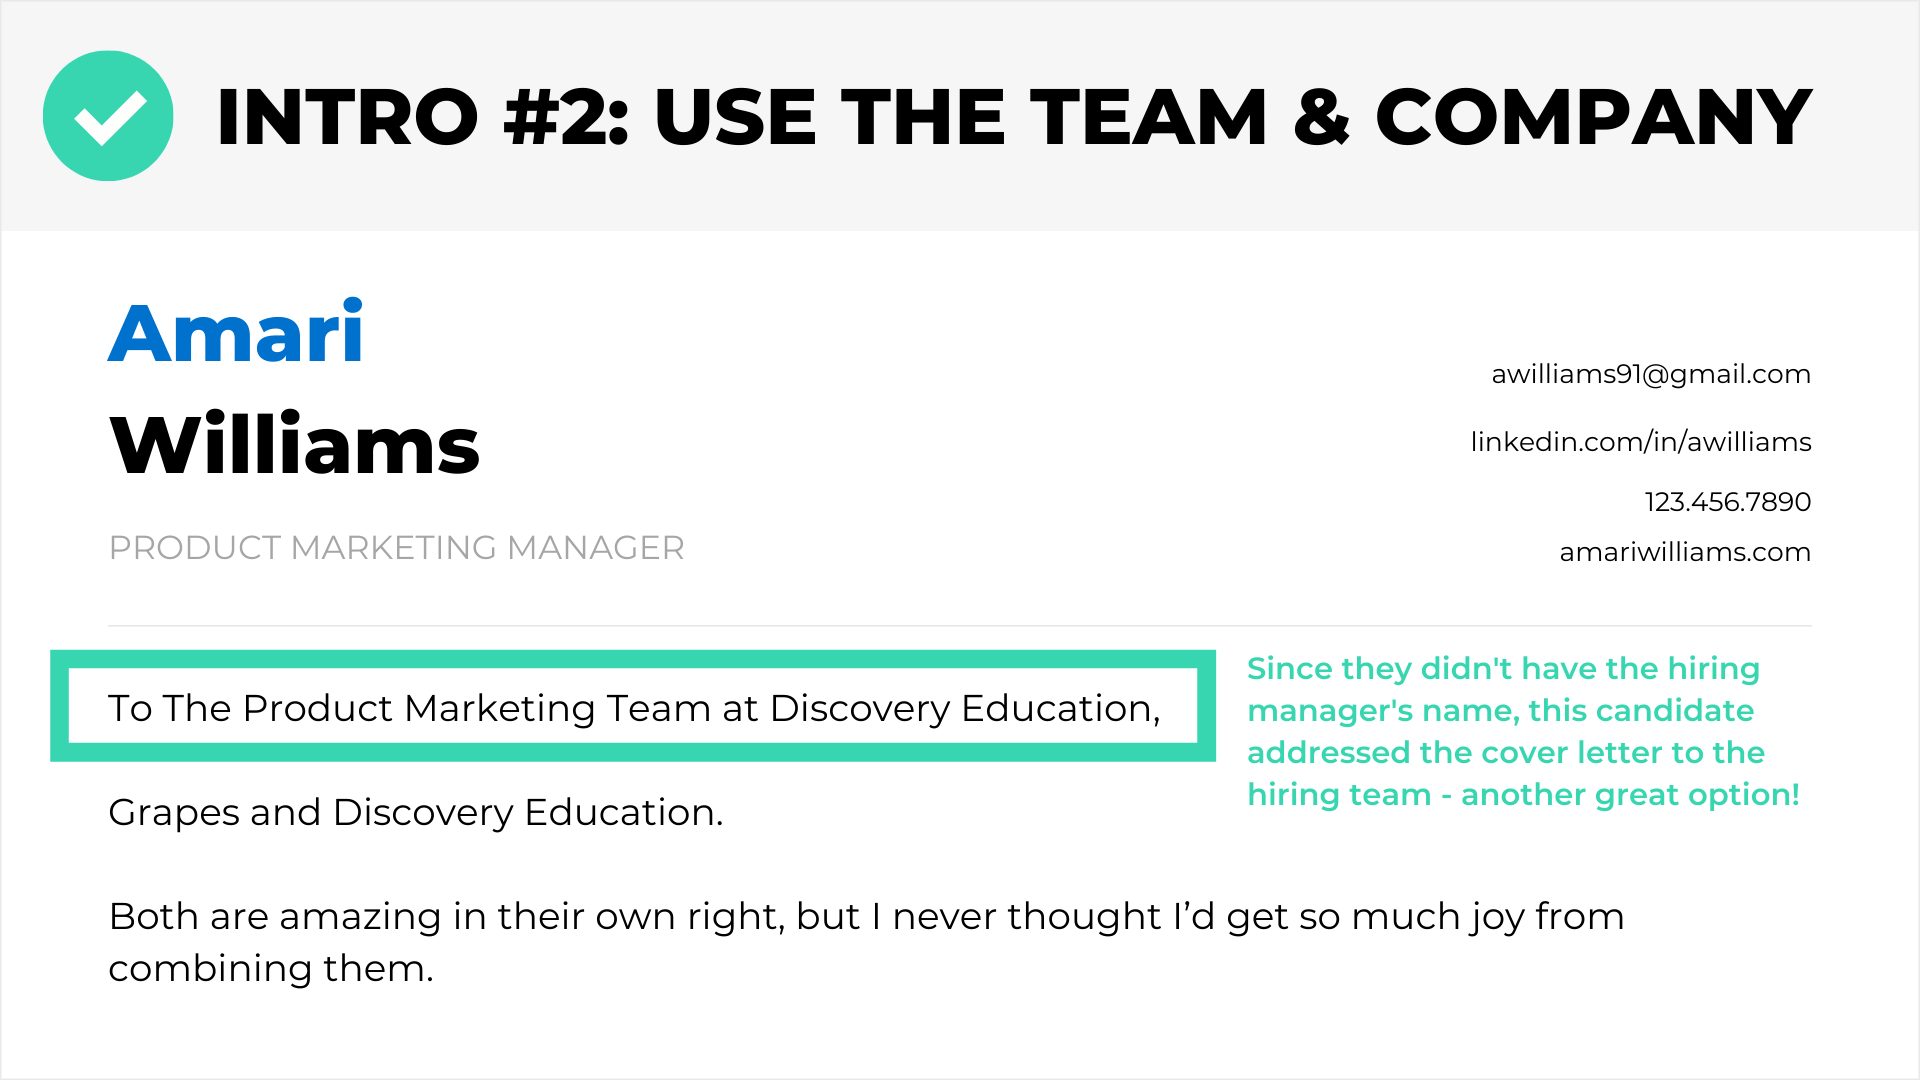 Example of Starting A Cover Letter With The Team & Company